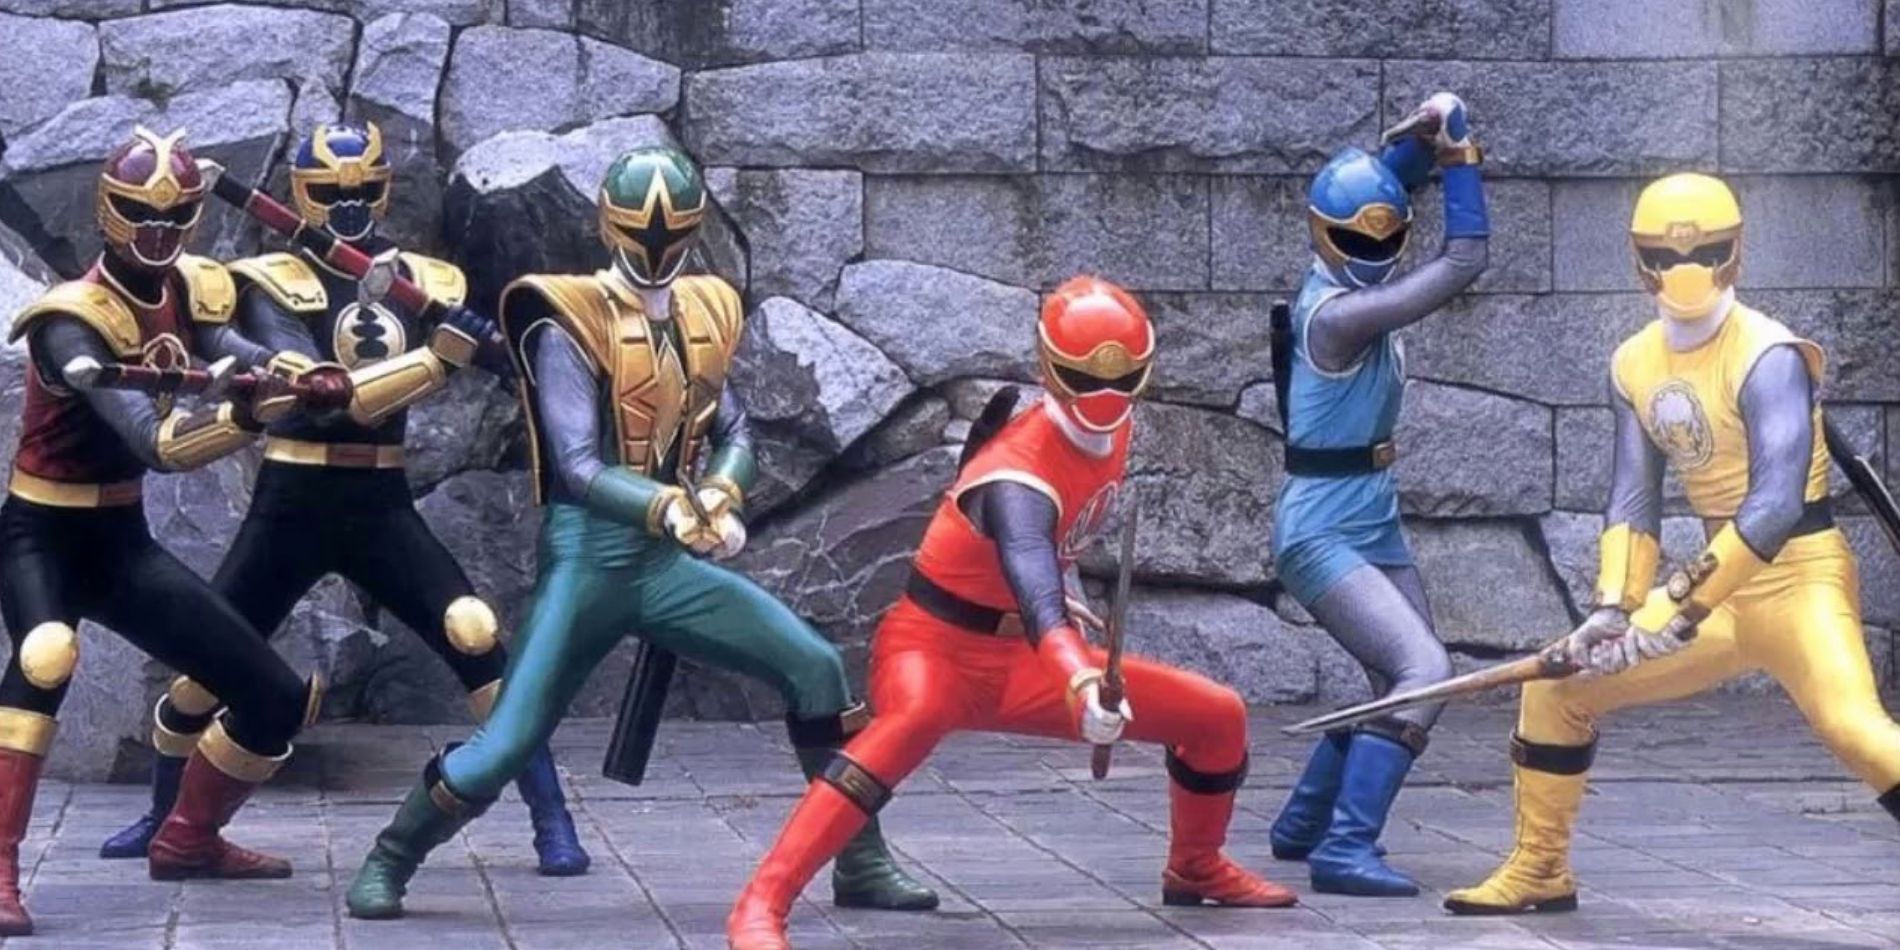 All Six Rangers from Power Rangers Ninja Storm, posing with their weaponry